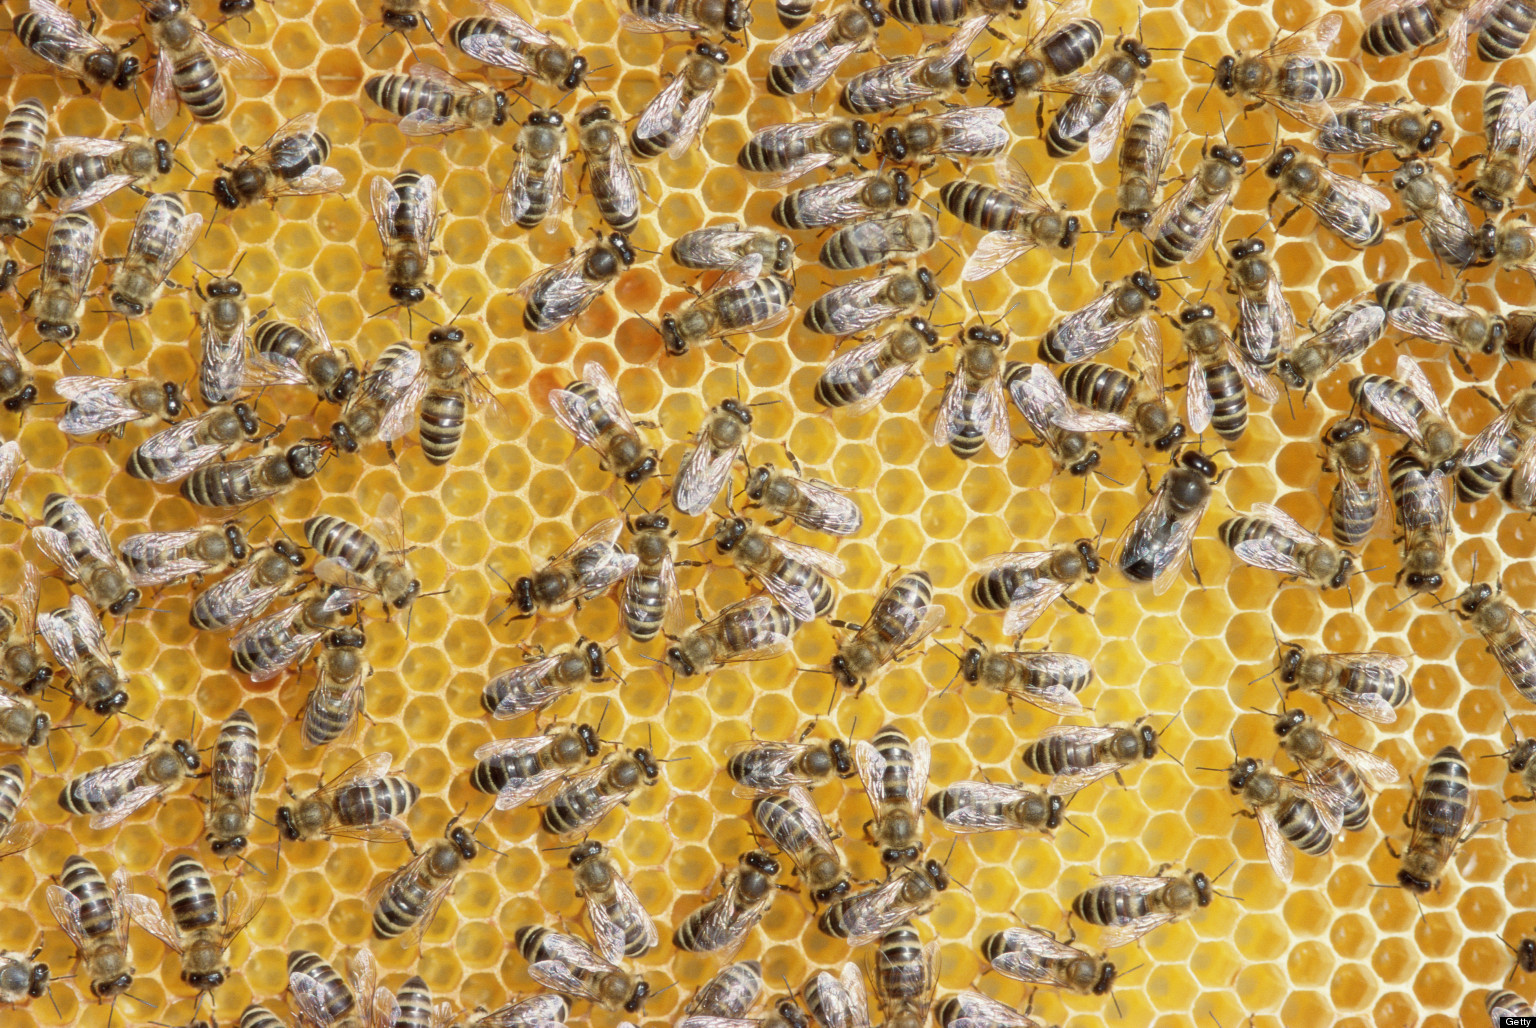 Bee Sperm Bank Could Be Key In Fight Against Colony Collapse